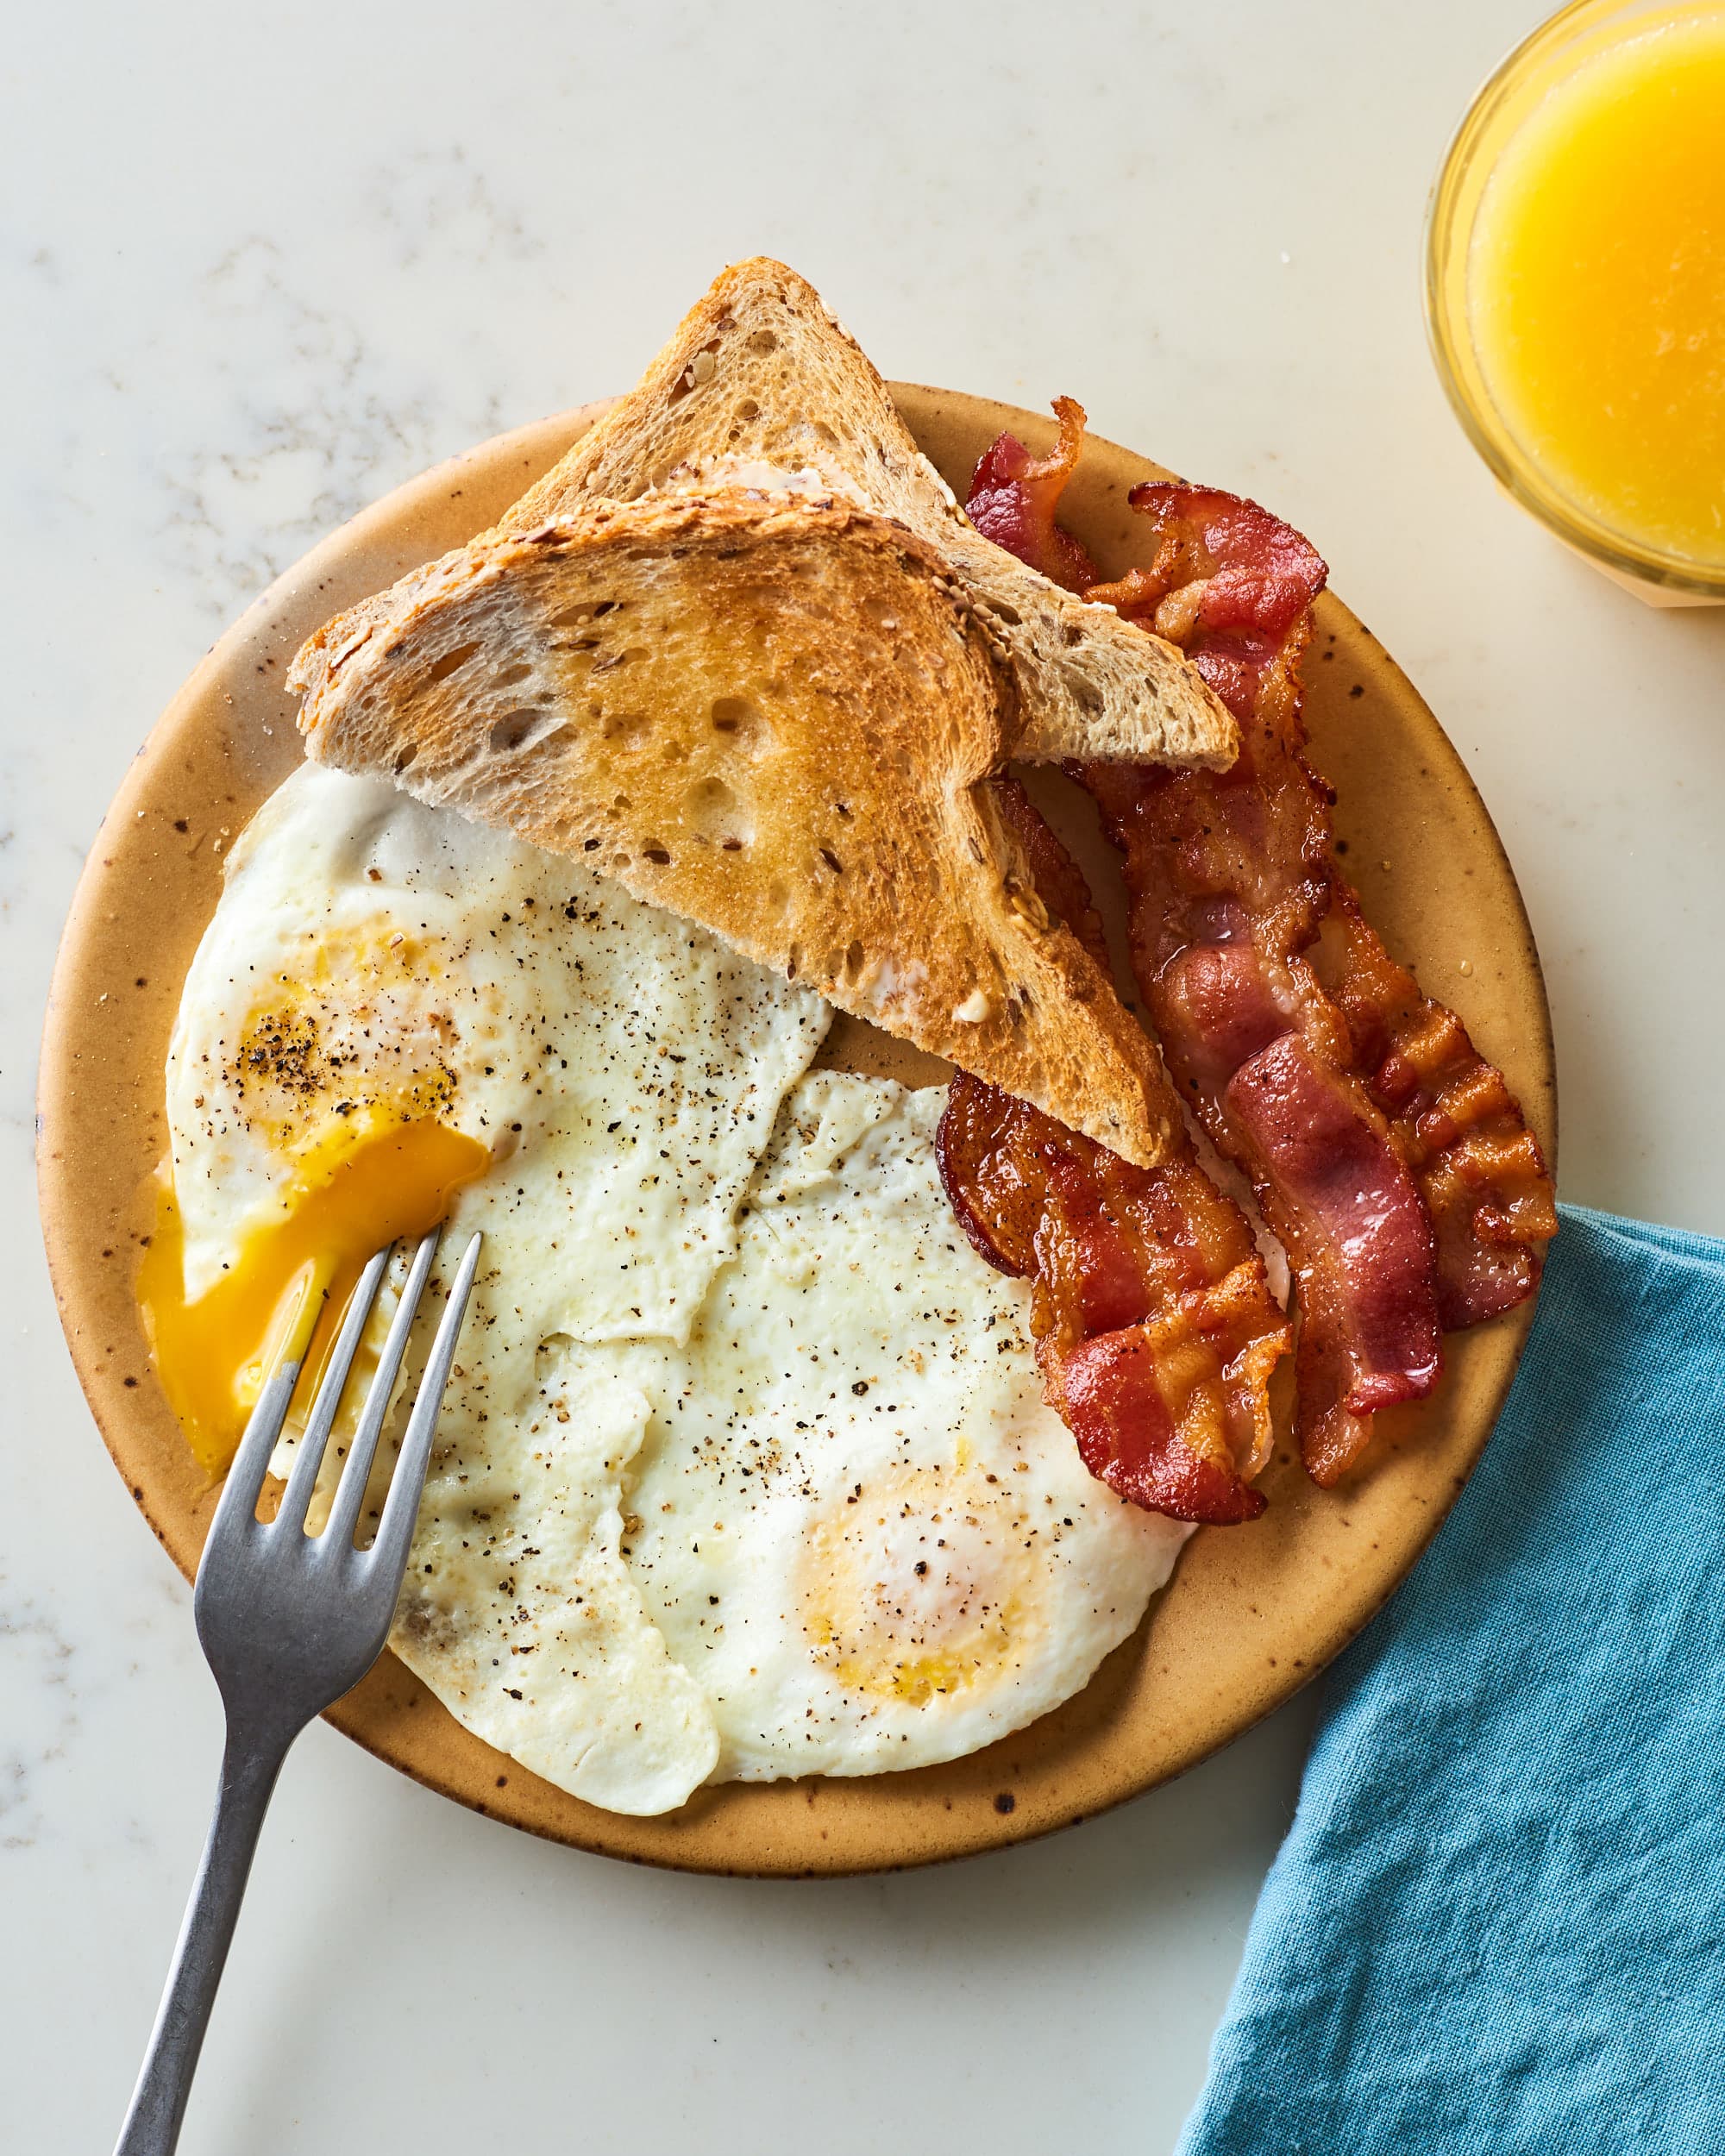 https://cdn.apartmenttherapy.info/image/upload/v1577132645/k/Photo/Recipes/2020-01-How-to-Make-a-Perfect-Over-Easy-Egg/How-to-Make-a-Perfect-Over-Easy-Egg_028.jpg